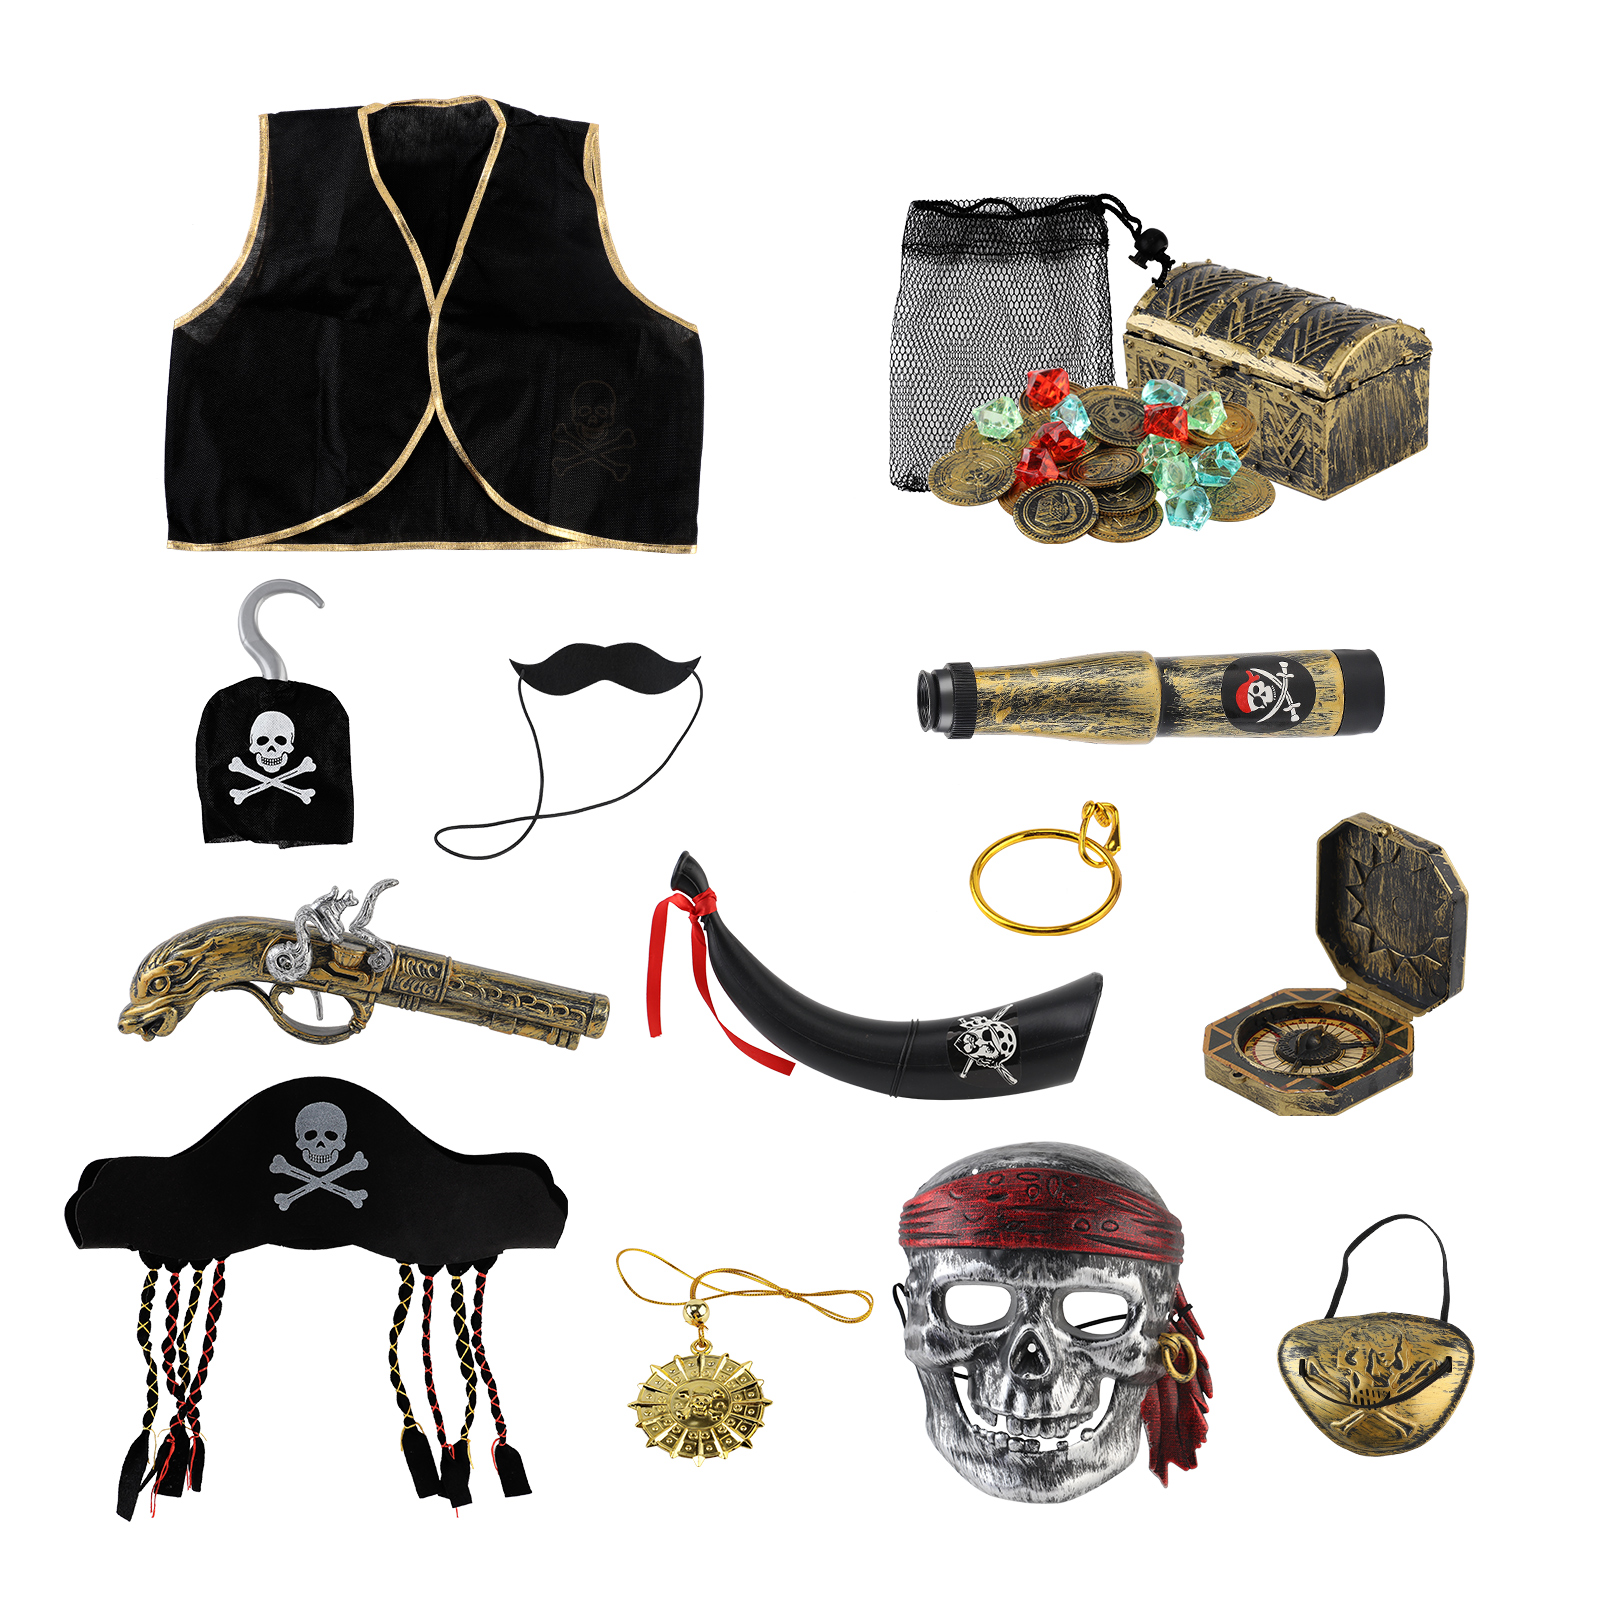 Pirate Treasure Play Set for Kids,Pirate Role-Play Toys,Pirate Costume children උපාංග